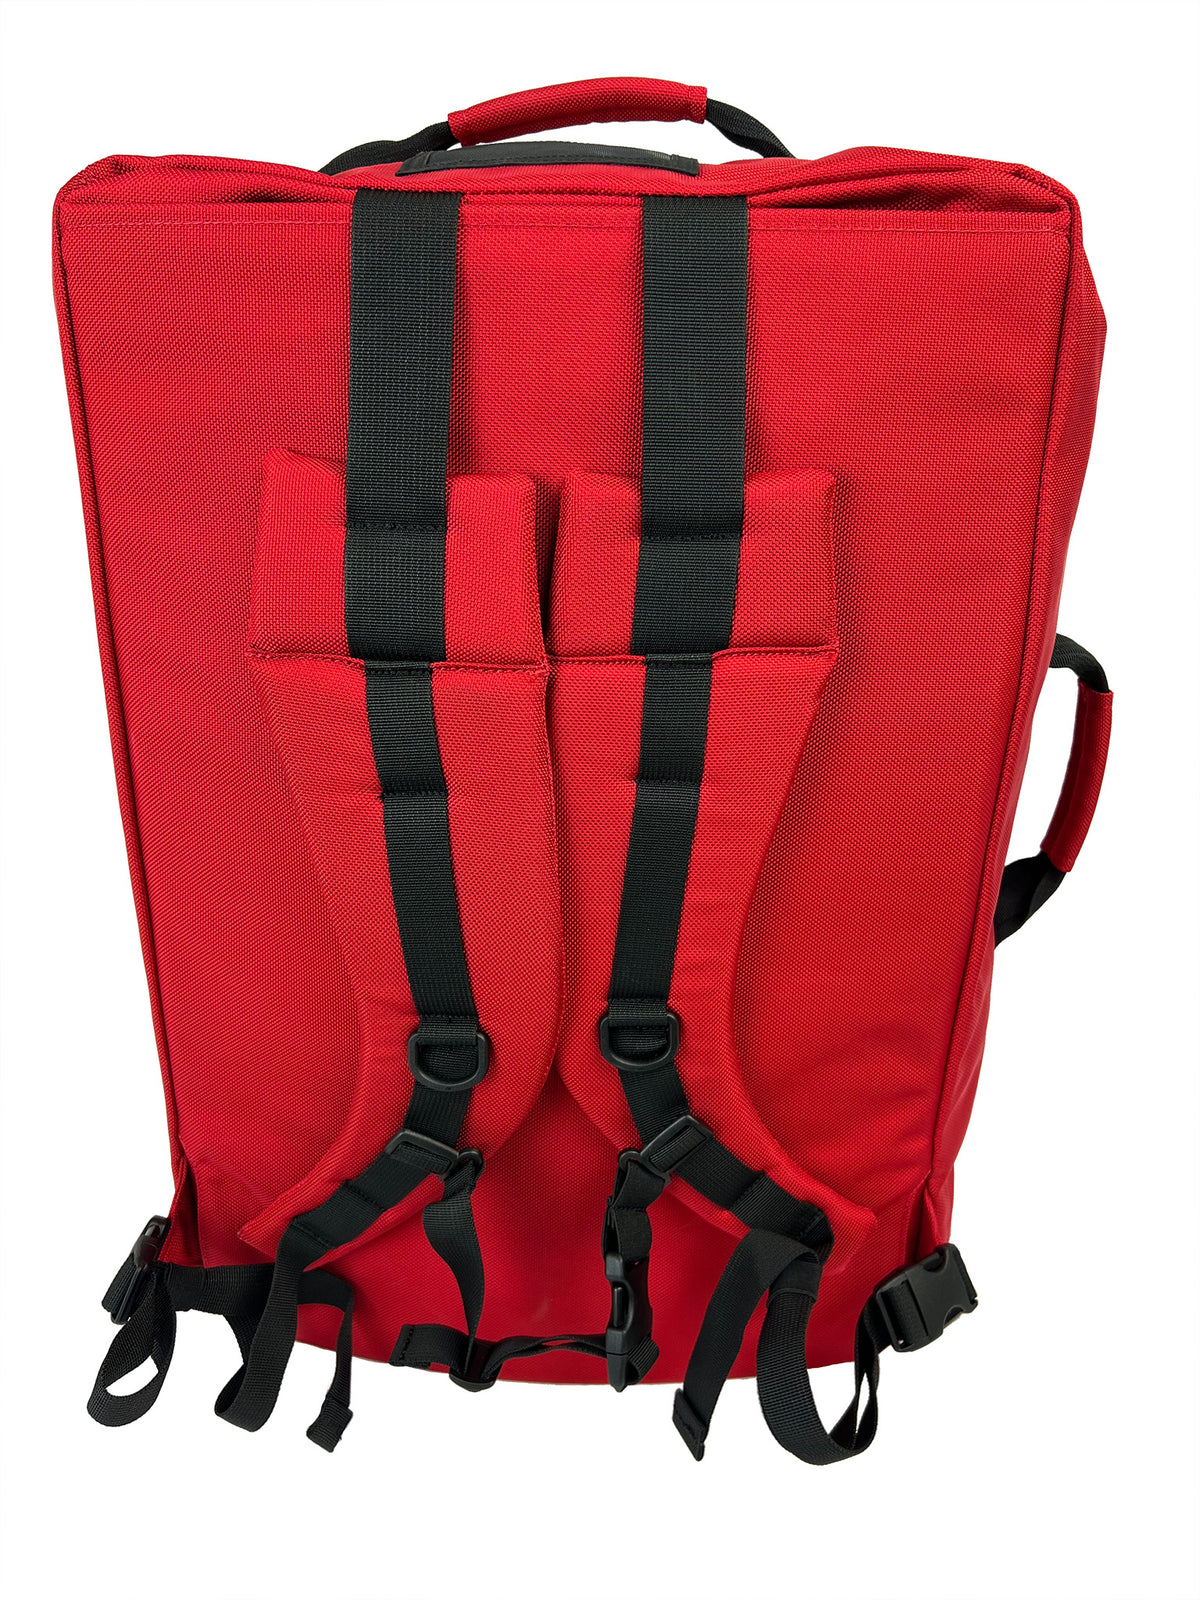 Wolfpack Gear™ Out of County Bag - Red back pack straps deployed